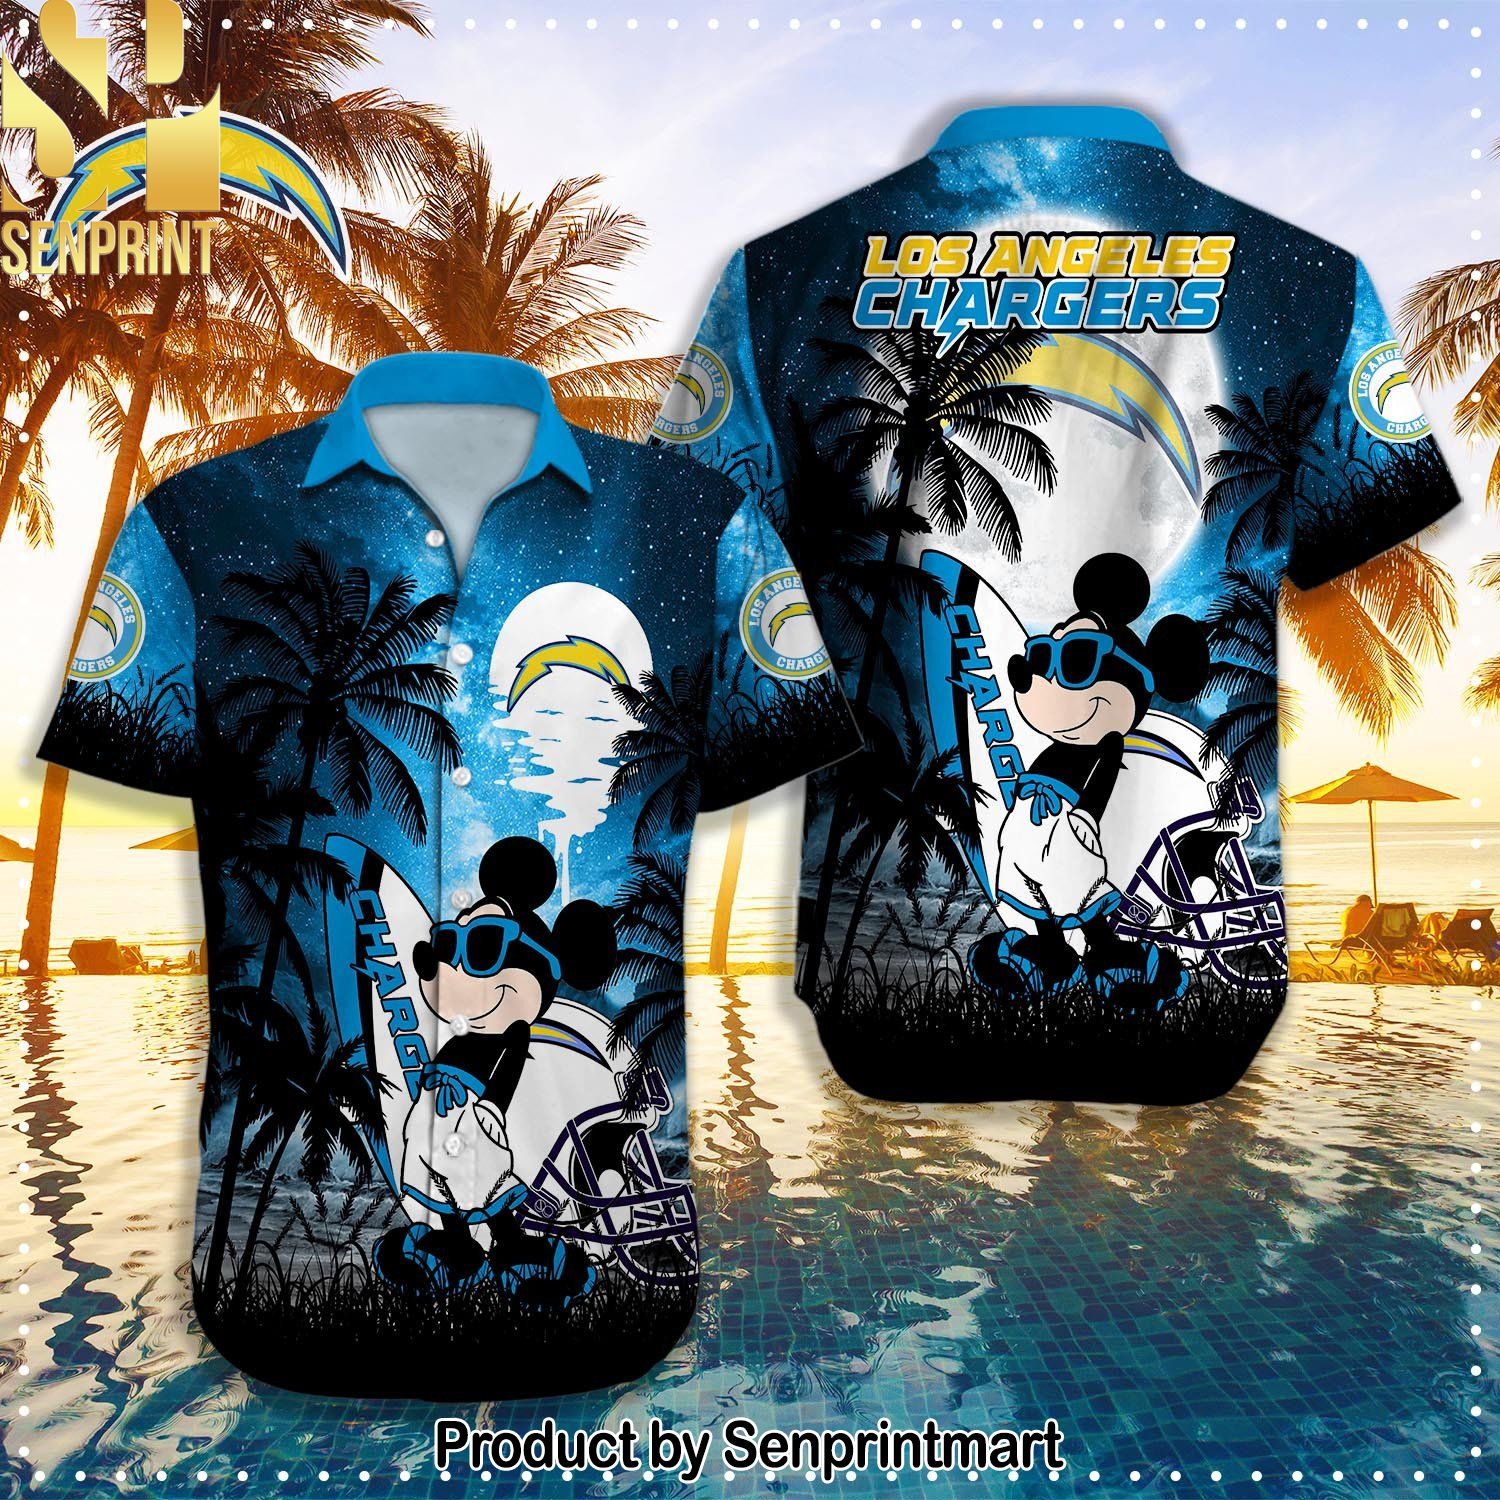 Los Angeles Chargers NFL Awesome Outfit Hawaiian Shirt and Shorts